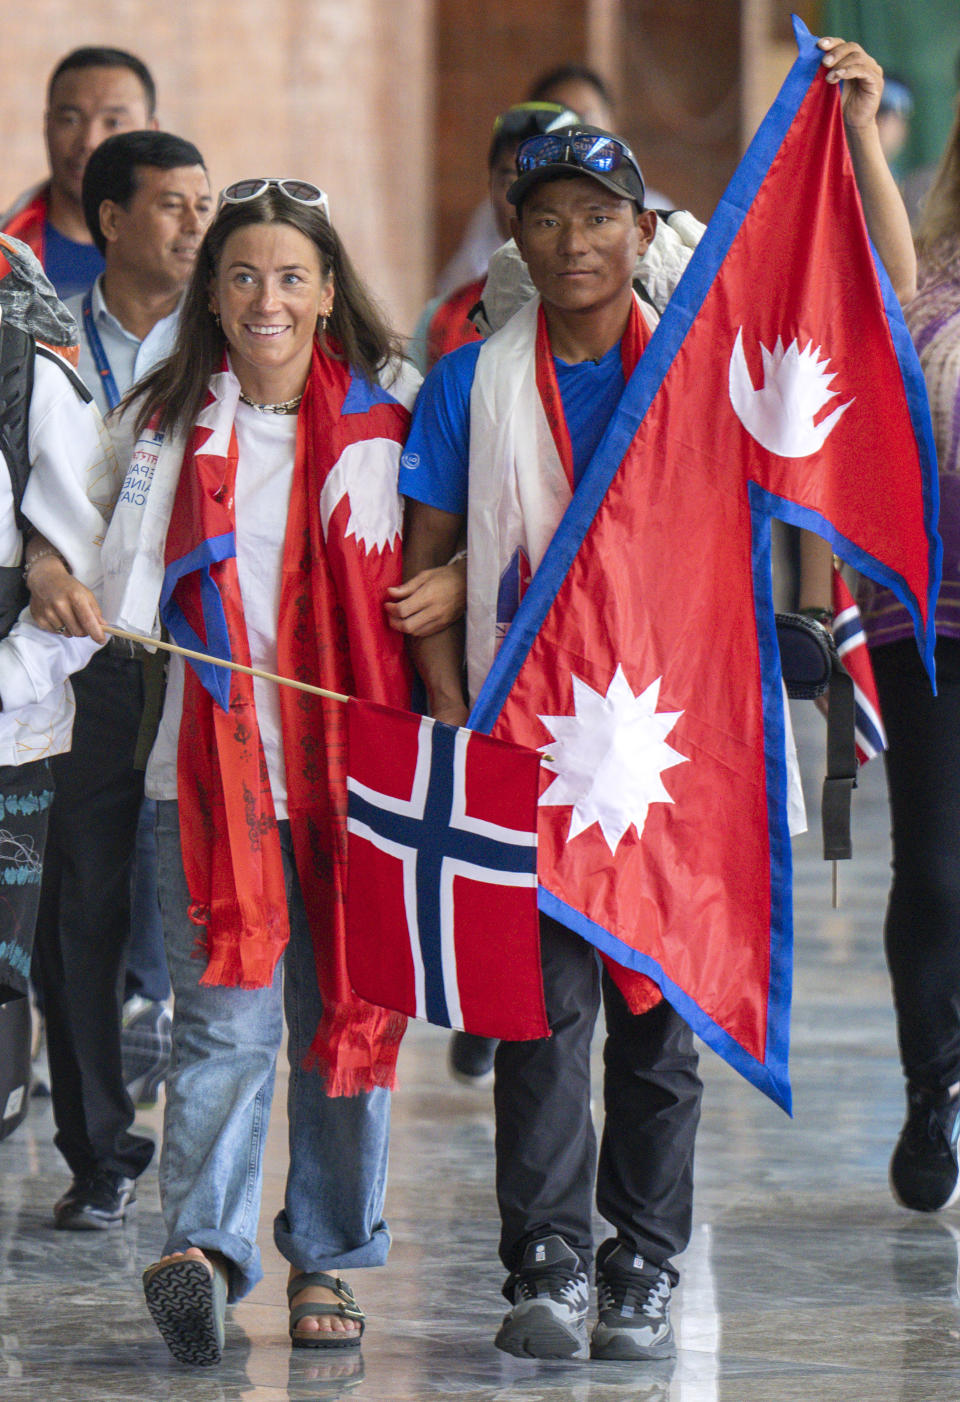 Norwegian climber Kristin Harila, left, and her Nepali sherpa guide Tenjen Sherpa, right, who climbed the world's 14 tallest mountains in record time, arrive in Kathmandu, Nepal, Saturday, Aug. 5, 2023. Harila and Sherpa shattered the record for the fastest climb of the 14 mountains more than 8,000 meters (about 26,000 feet) high when they topped Mount K2 in Pakistan late last month. The previous record was 189 days, and the pair did it in 92 days. (AP Photo/Niranjan Shrestha)